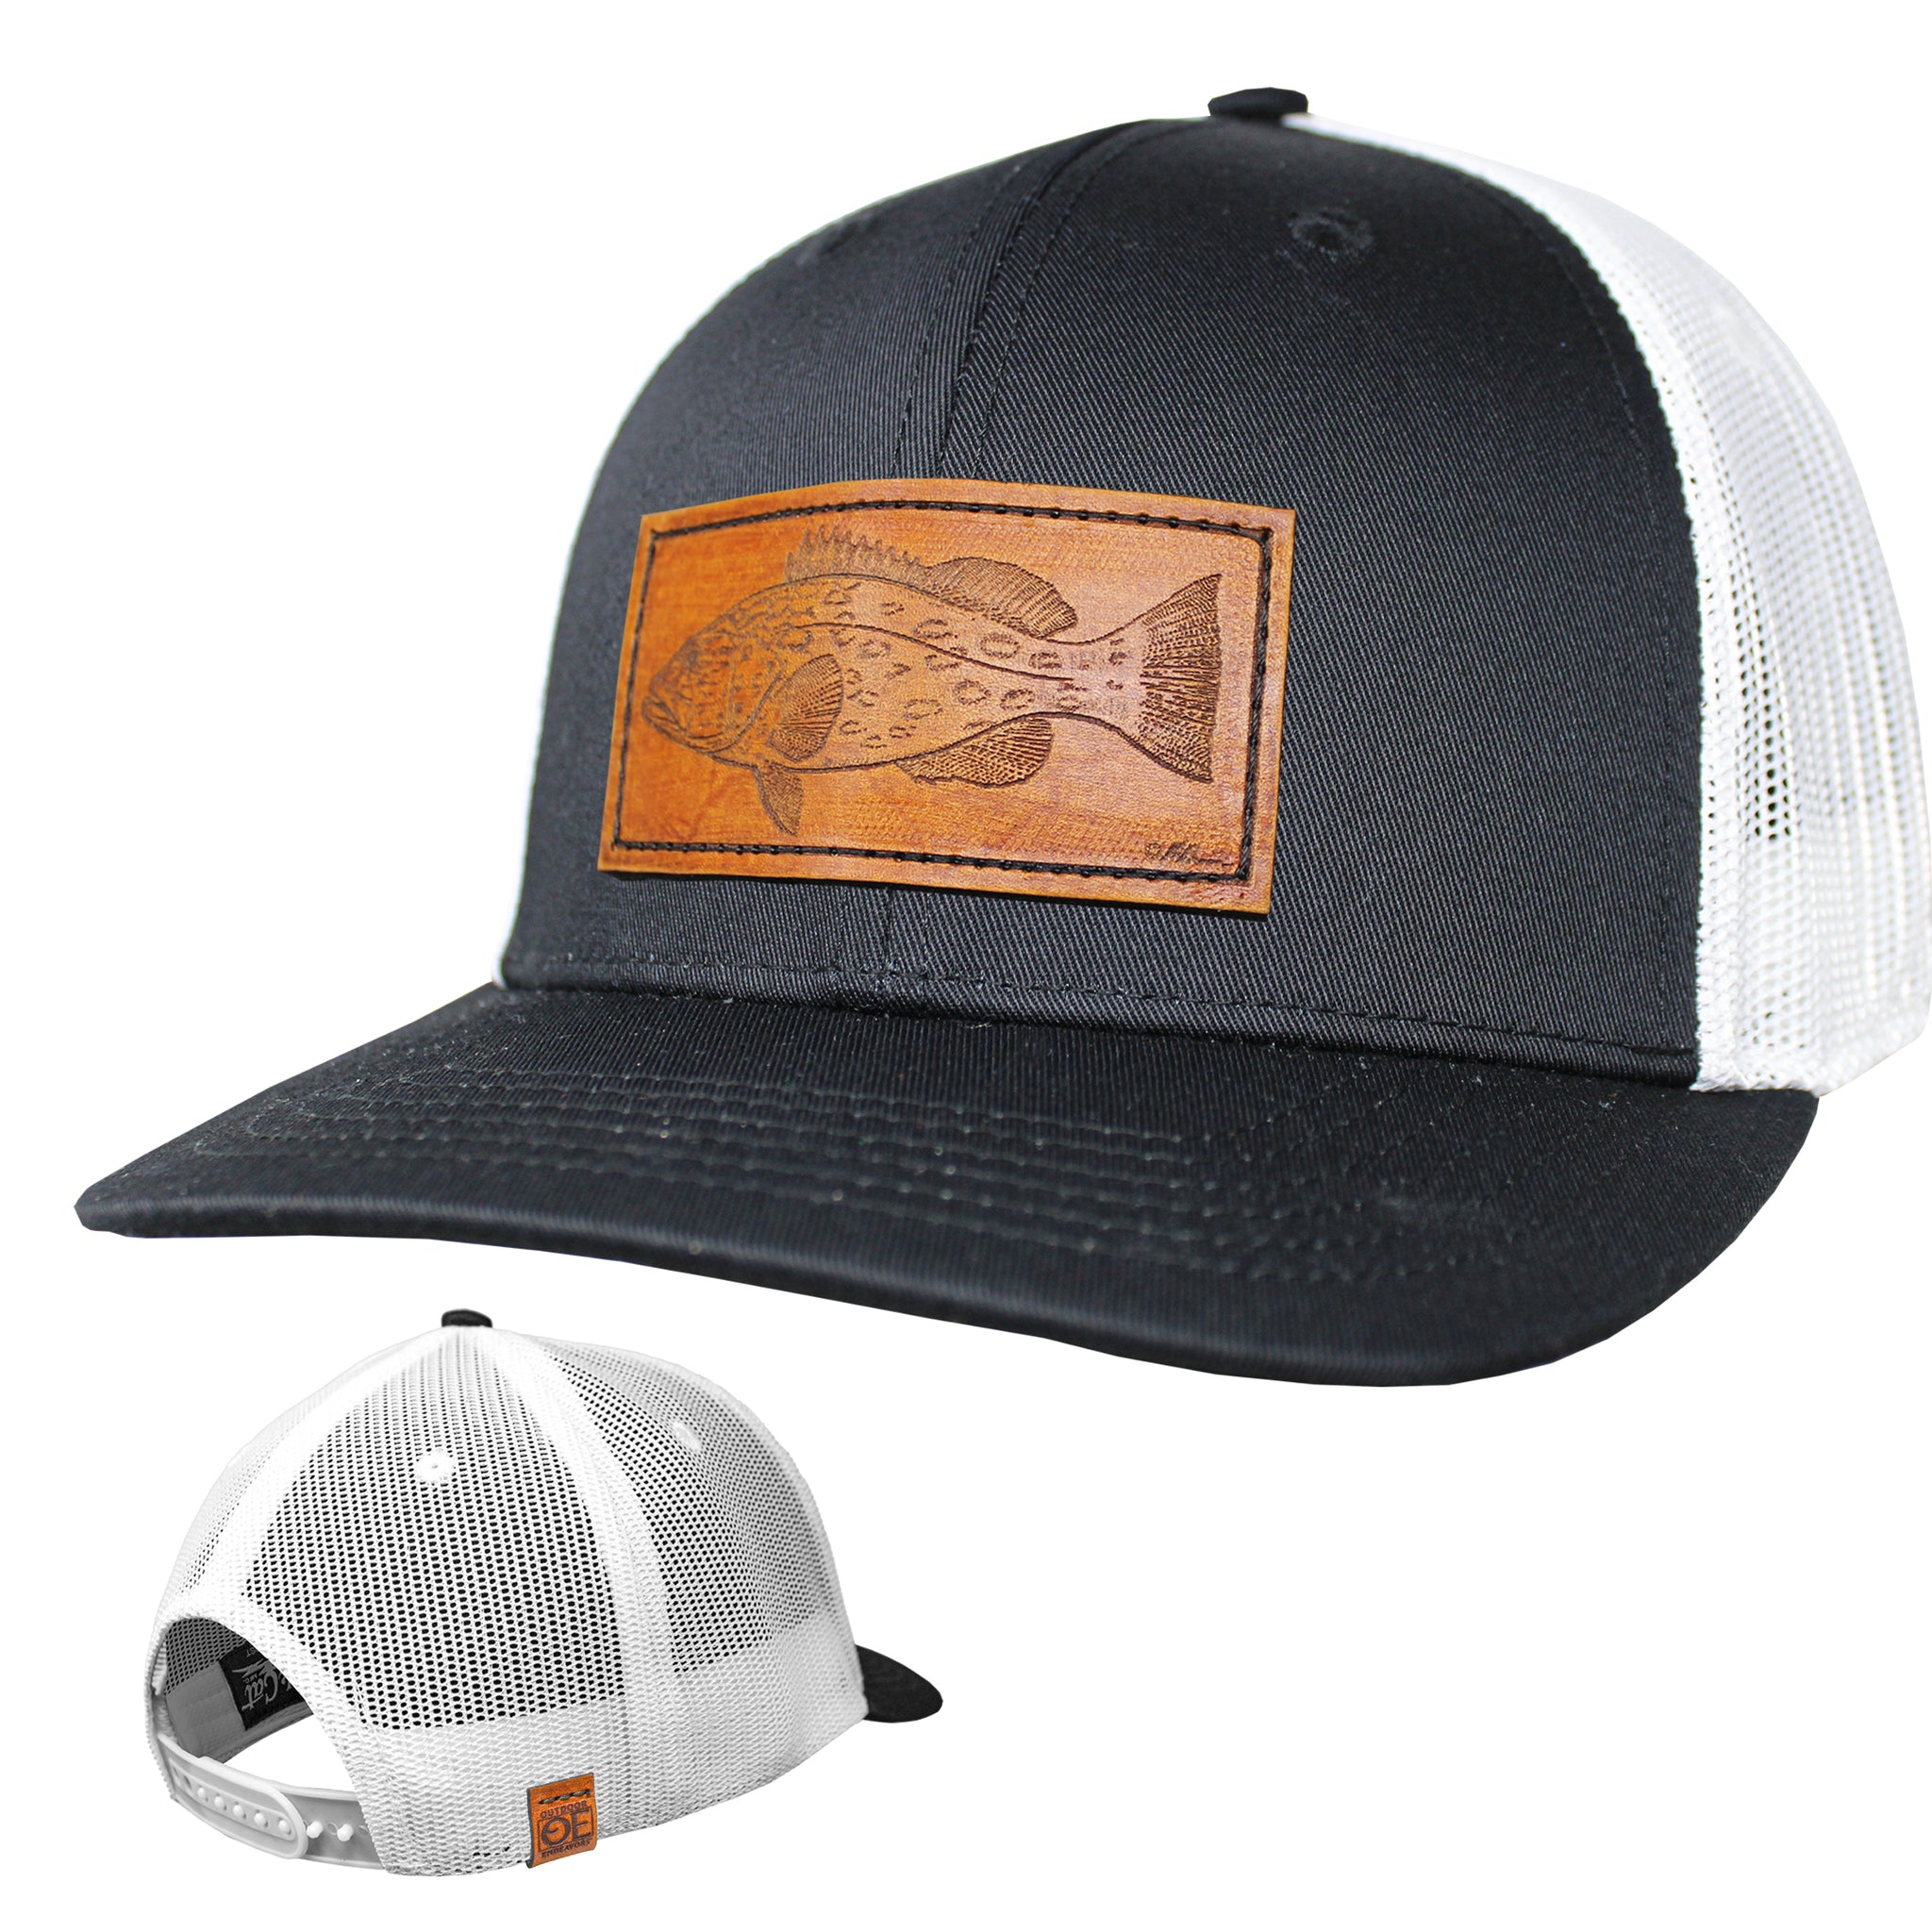 OE - Performance Trucker Hat - GAG Grouper Leather Patch